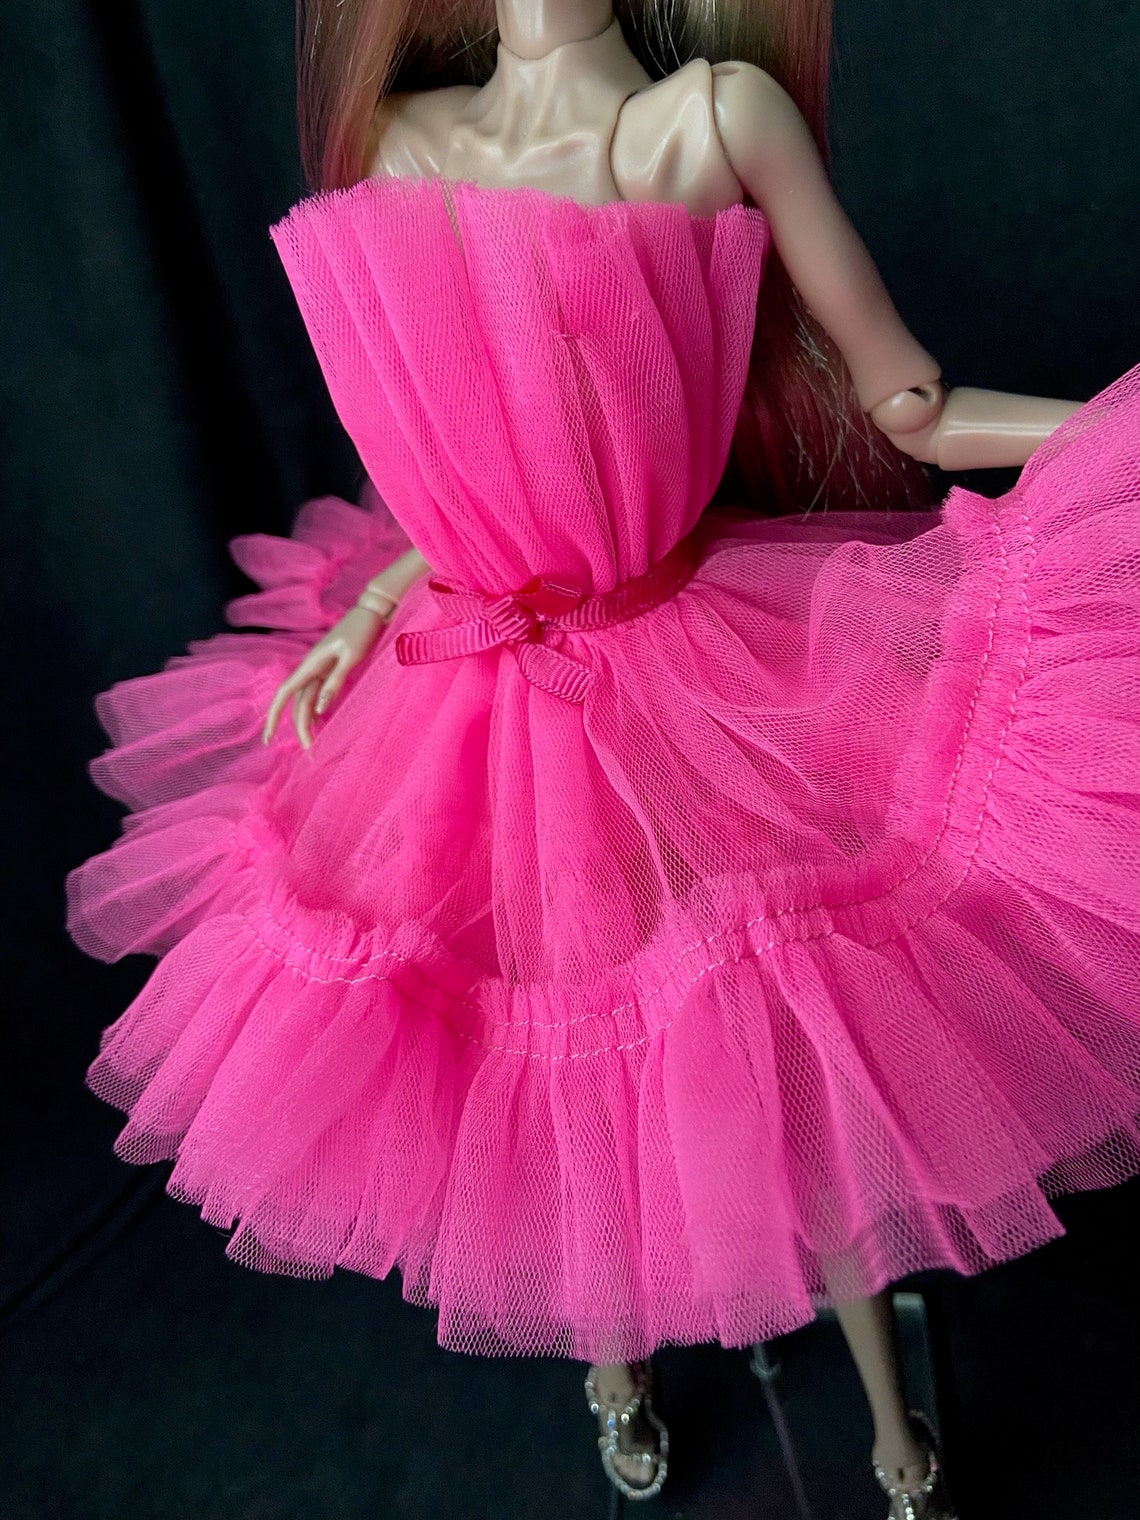 Tulle dress pink for dolls